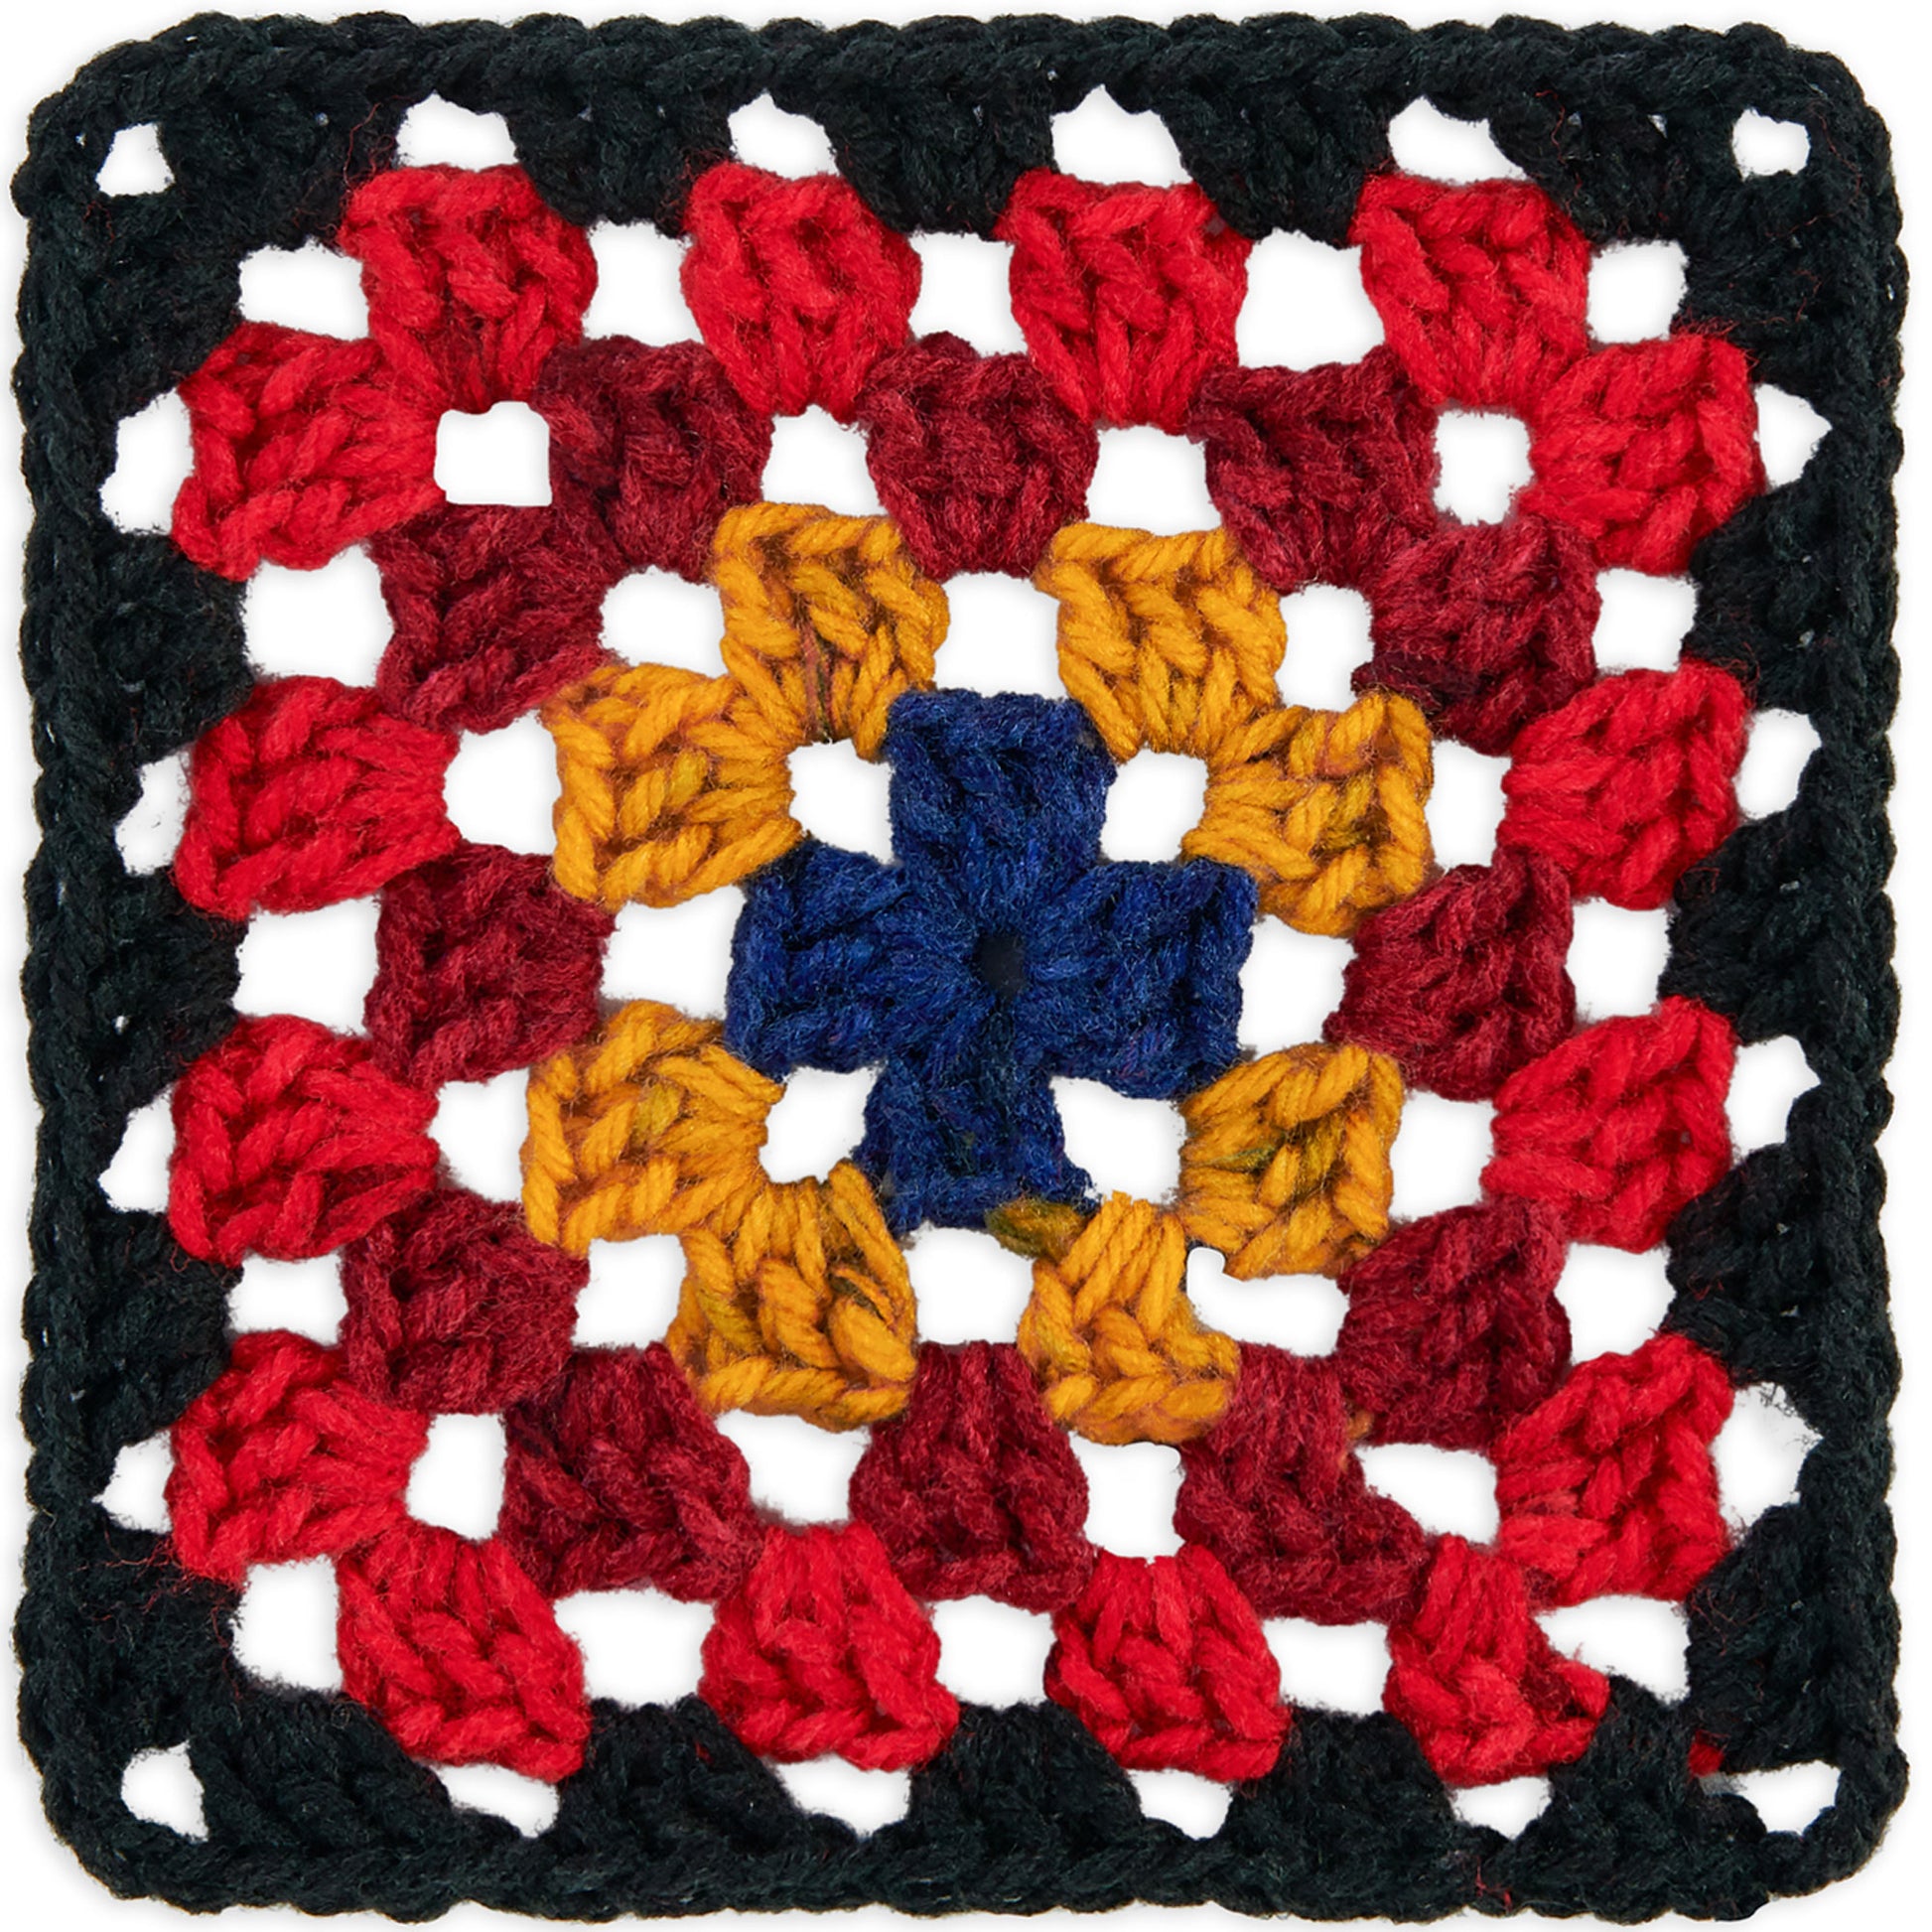 Red Heart - Granny Square in Red Heart Soft (downloadable PDF) - Wool  Warehouse - Buy Yarn, Wool, Needles & Other Knitting Supplies Online!